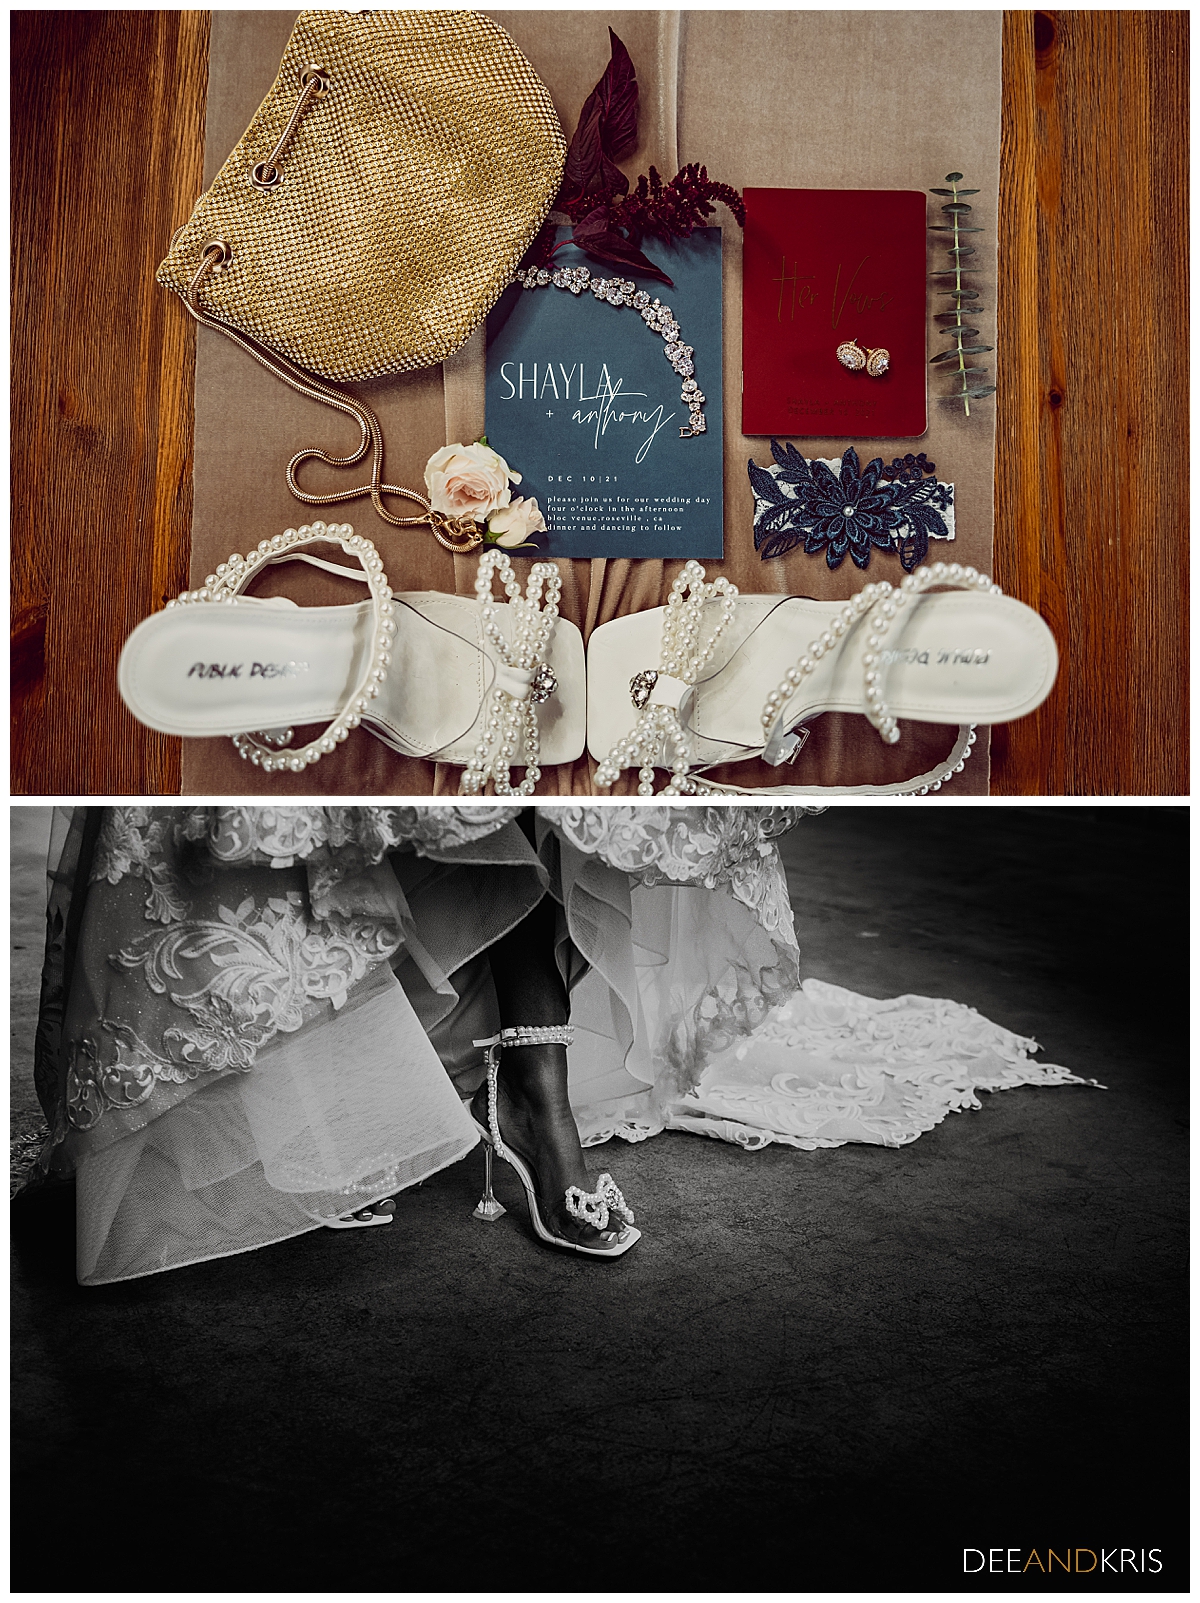 Two images: Top color image layflat set up of wedding details. Bottom black and white image of bride's shoes on her feet.